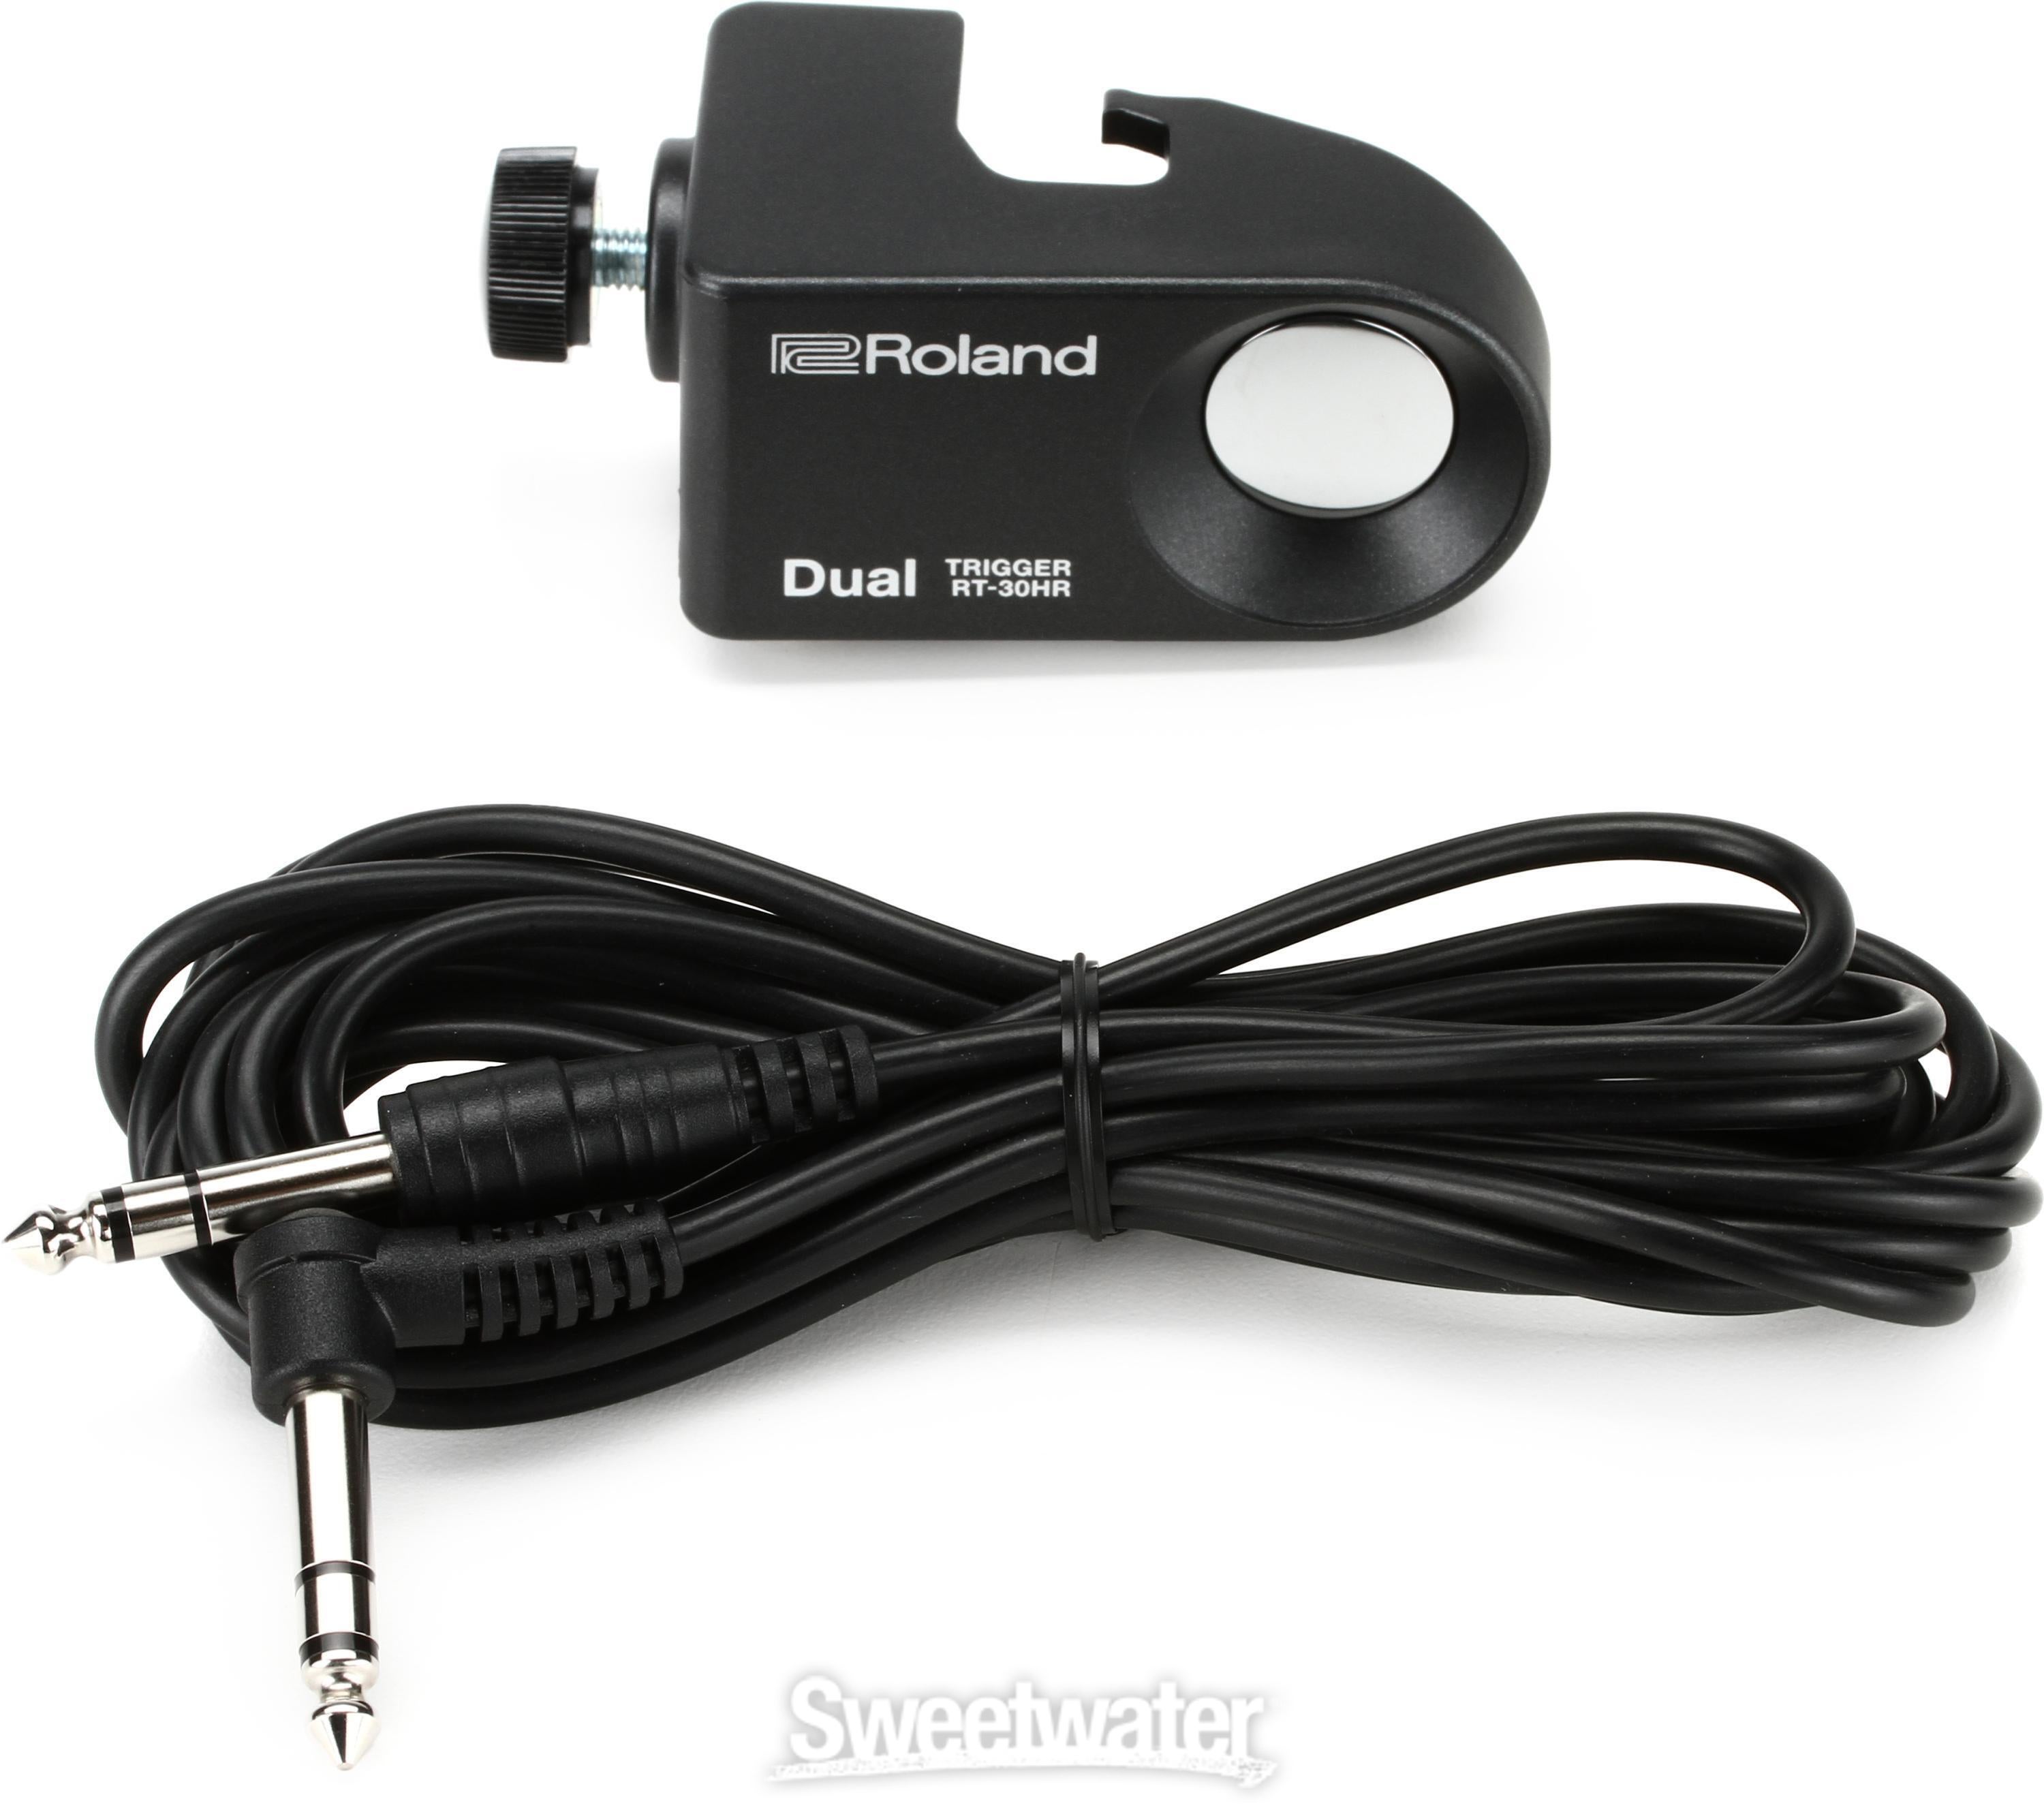 Roland RT-30HR Dual Zone Acoustic Drum Trigger | Sweetwater